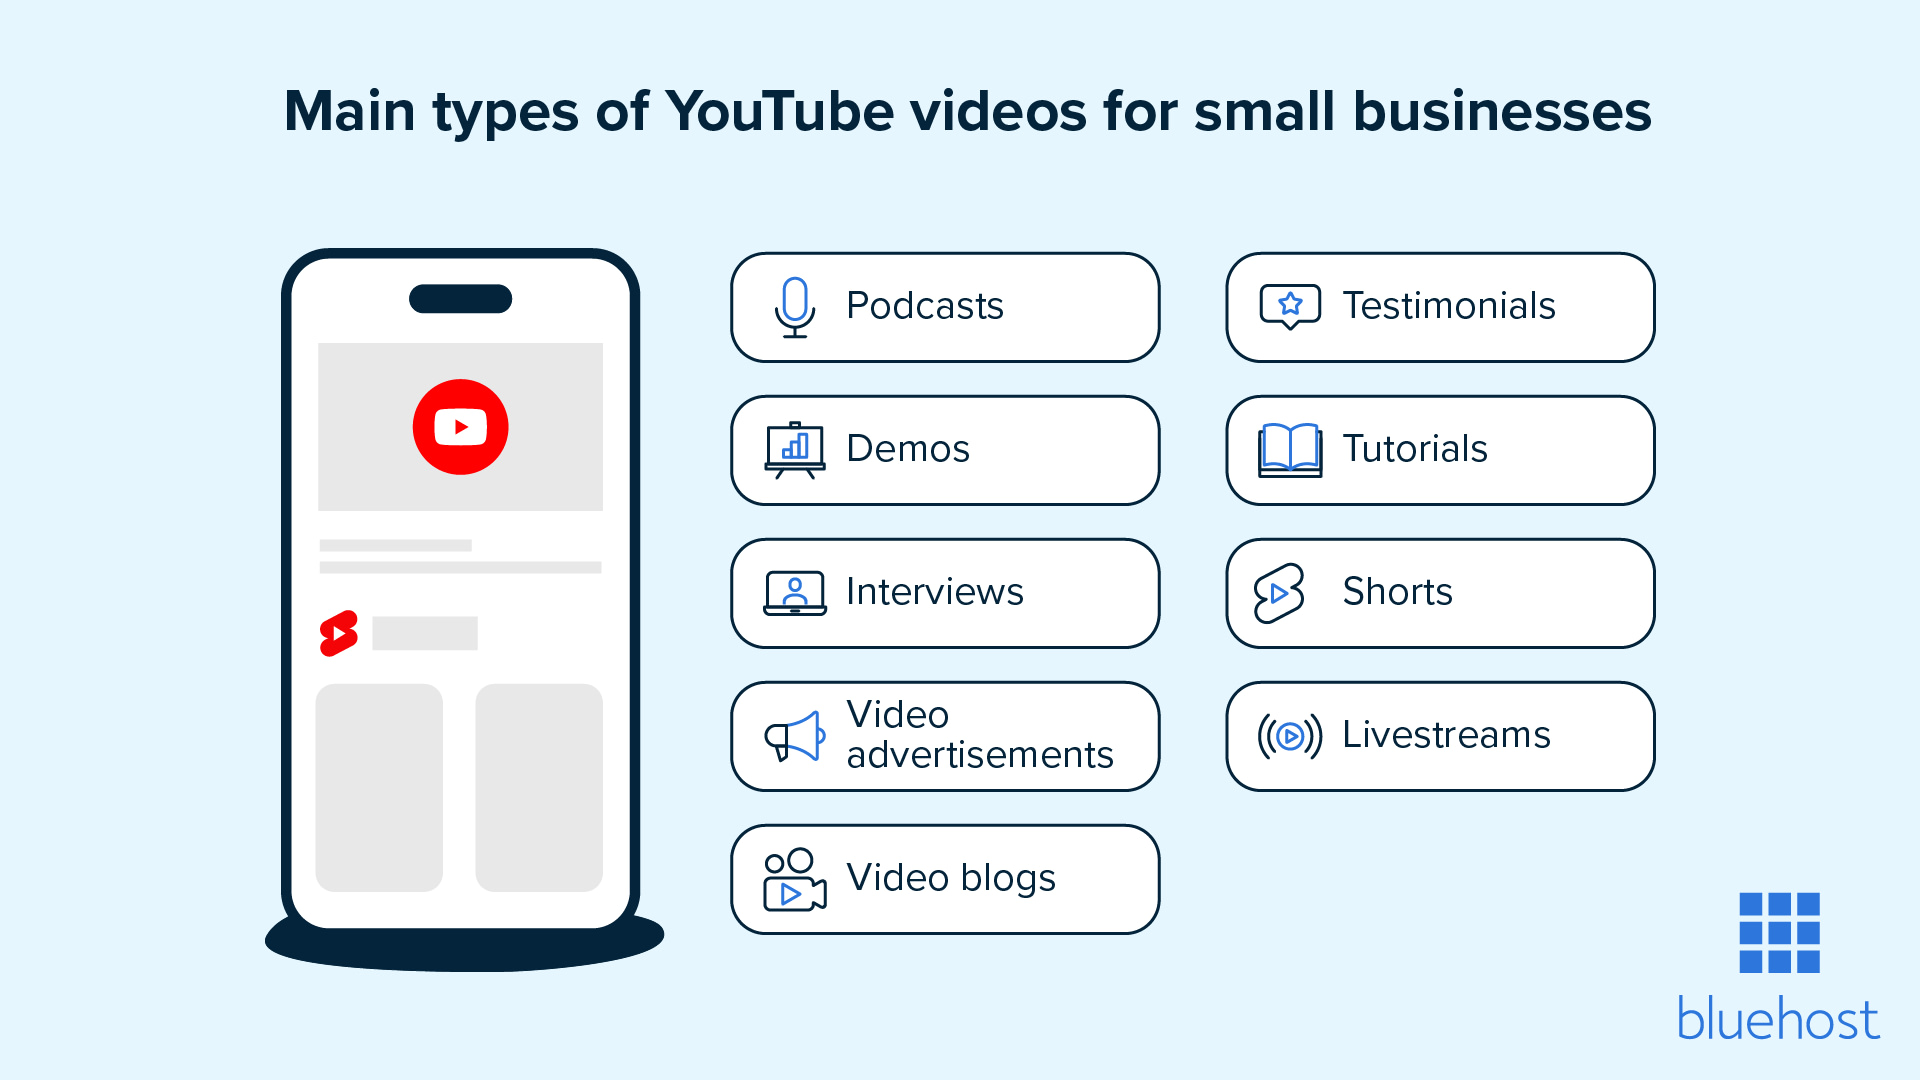 The main types of YouTube videos for small businesses.